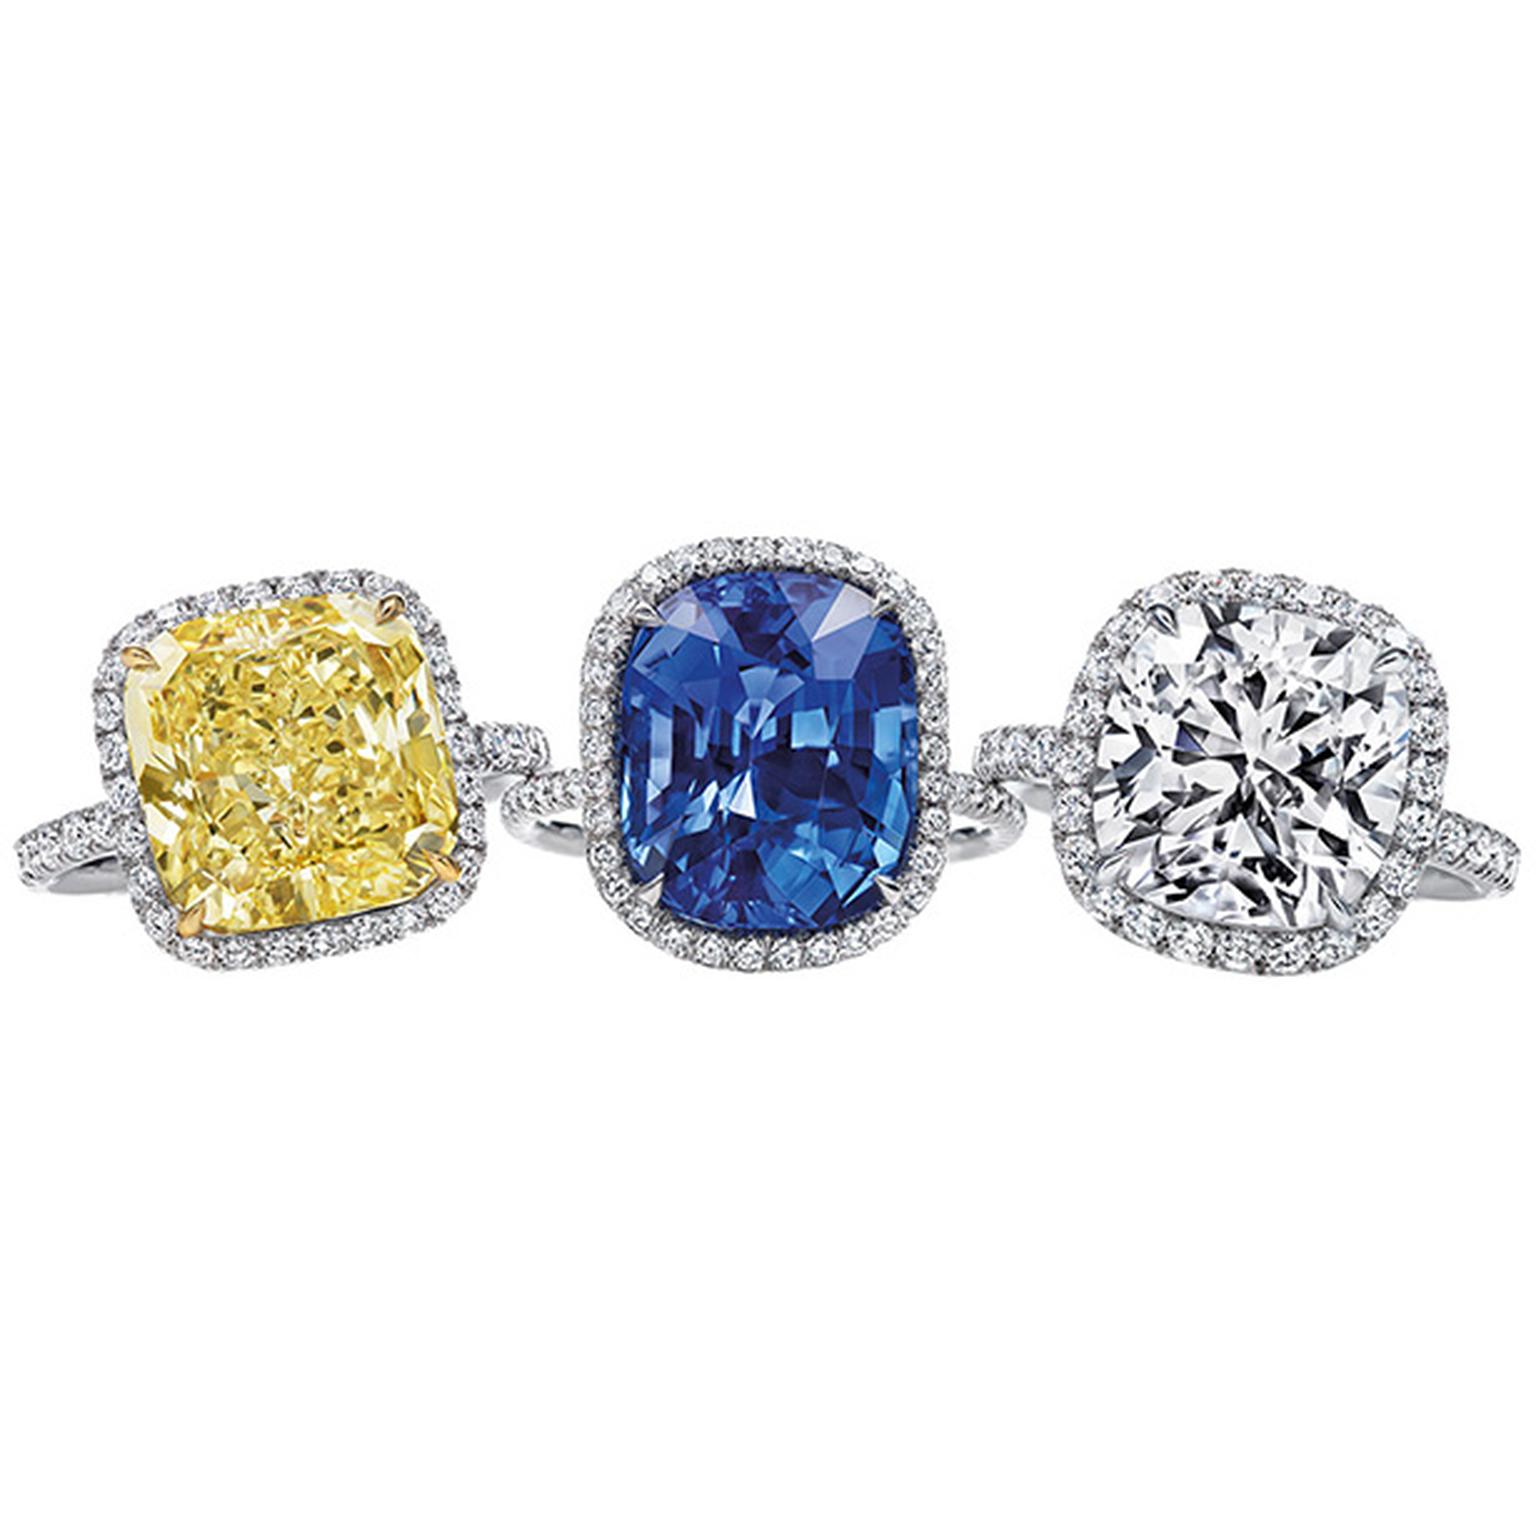 Harry Winston micropave rings